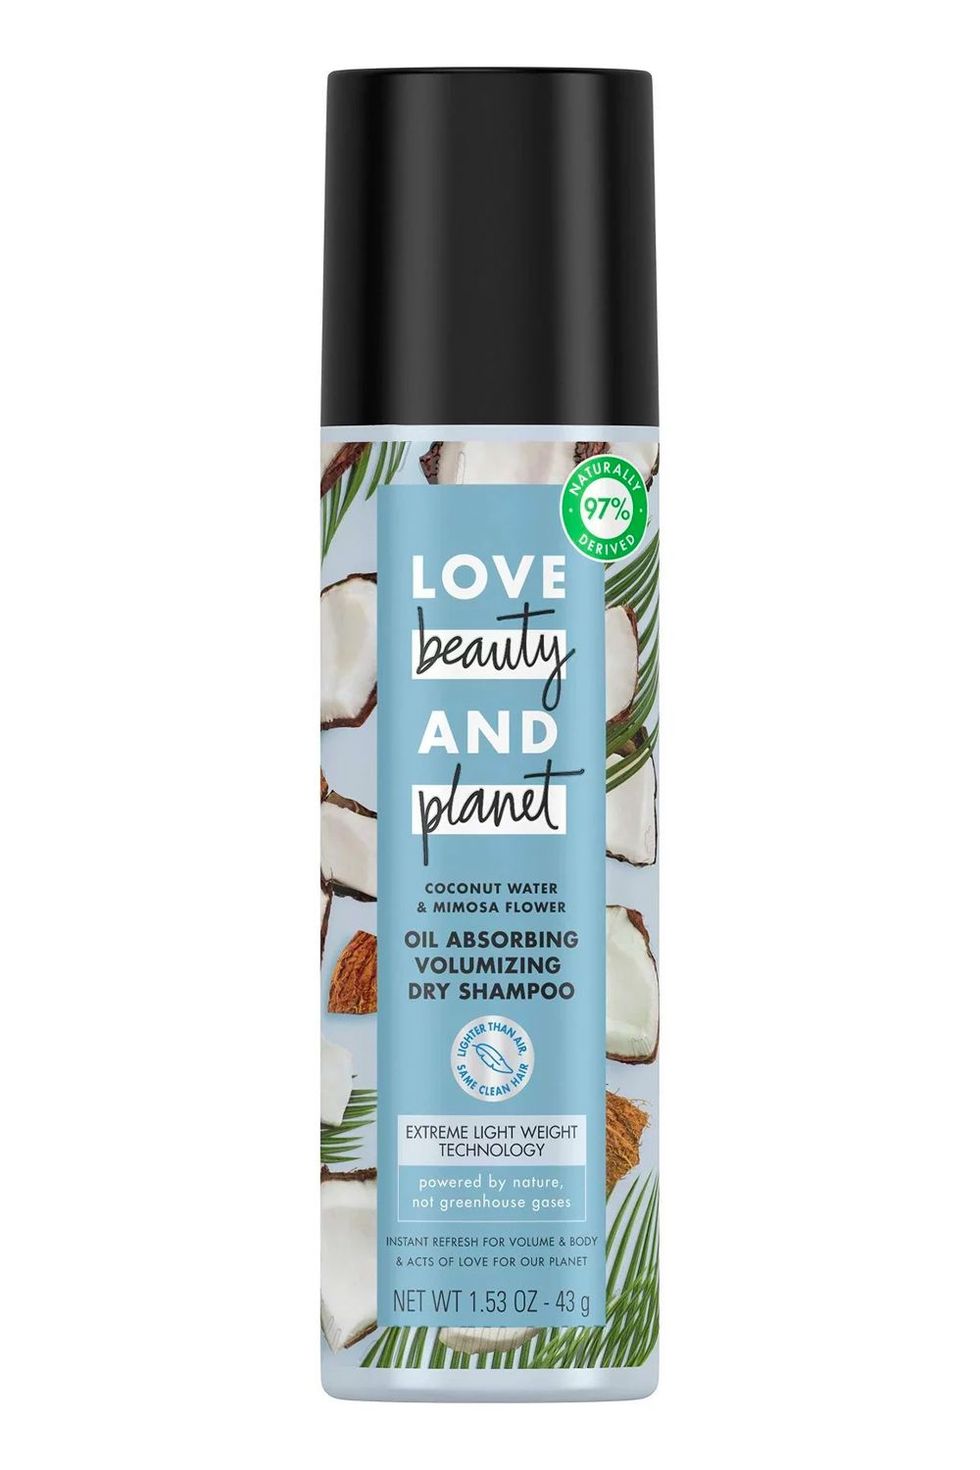 Love Beauty and Planet Coconut Water Dry Shampoo